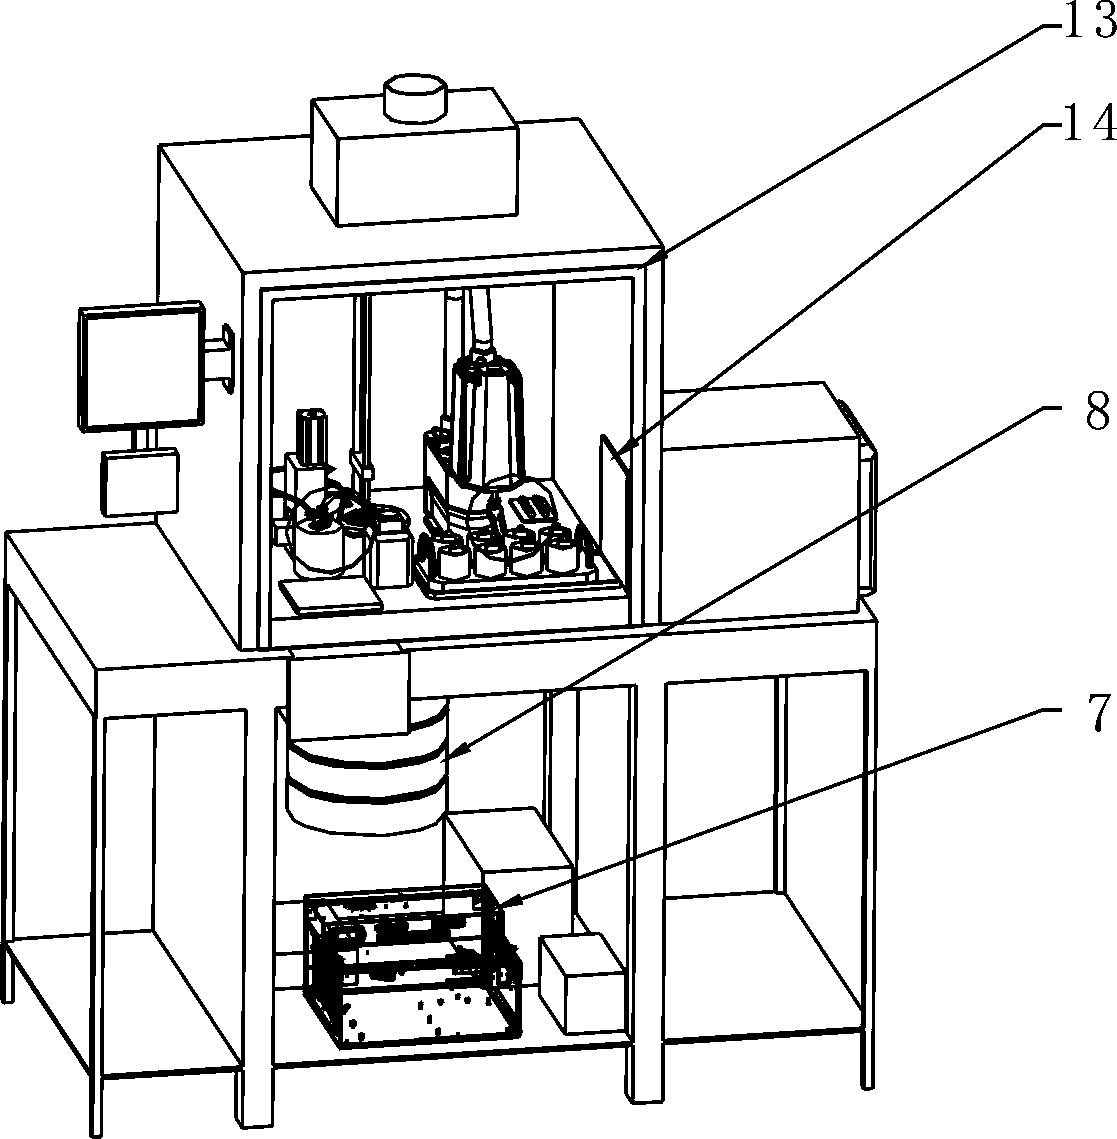 Automatic loading system and method for radio isotope liquid medicine capsules